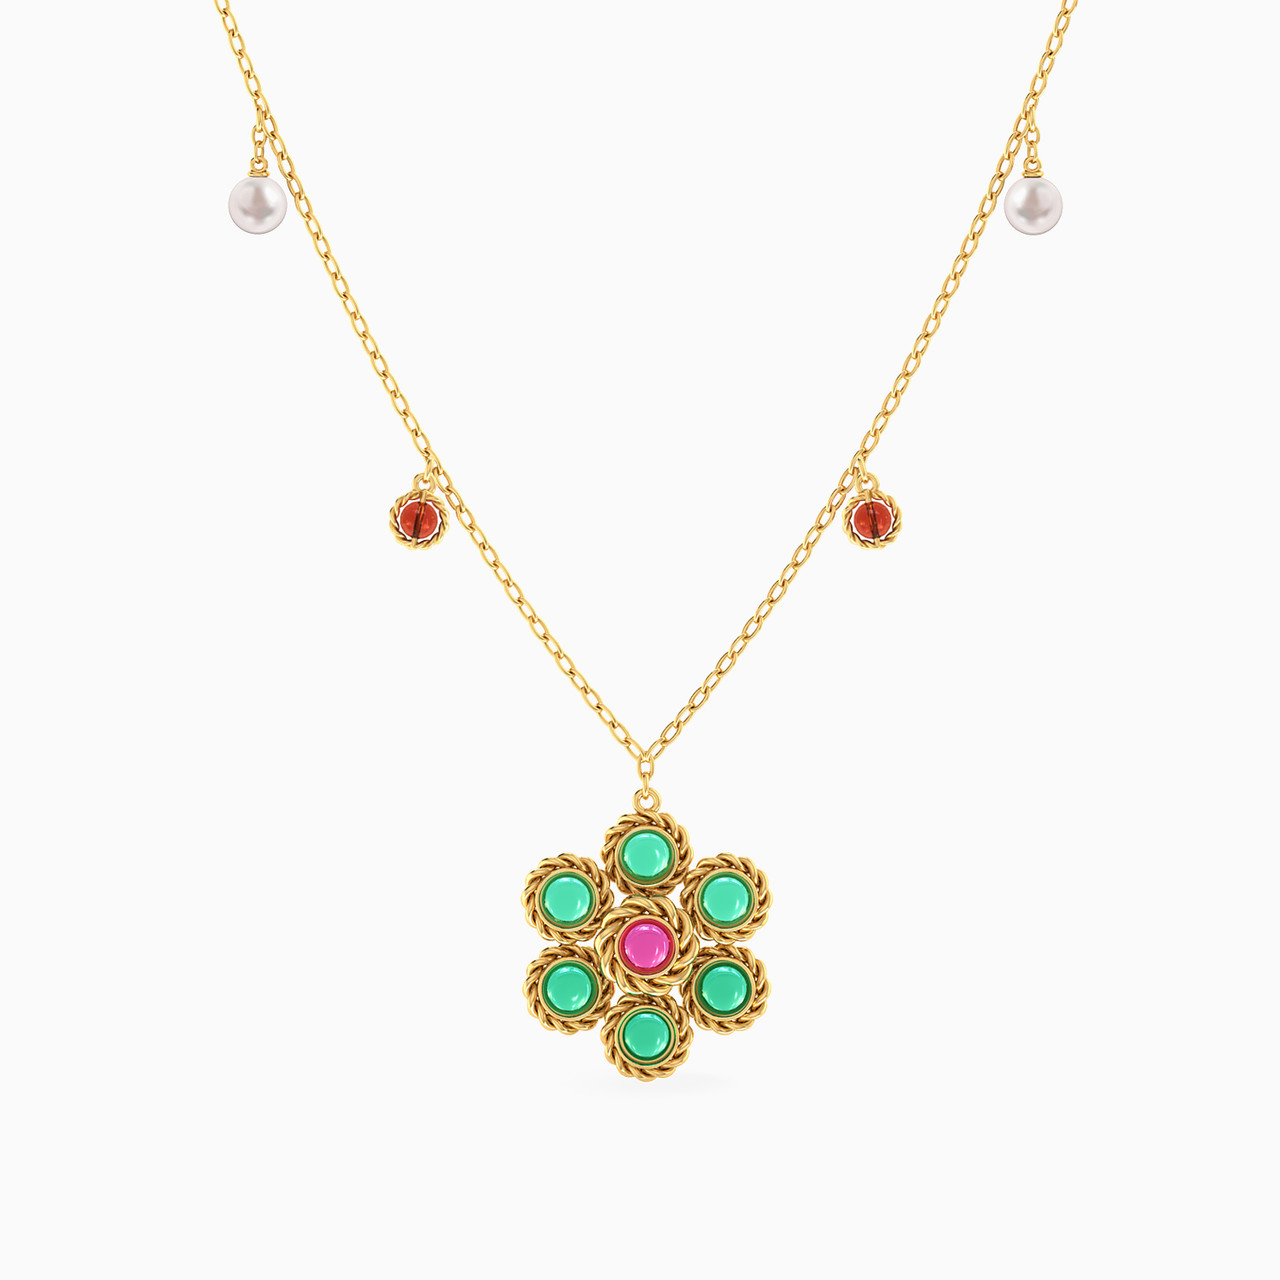 Flower Shaped Colored Stones Pendant with 18K Gold Chain